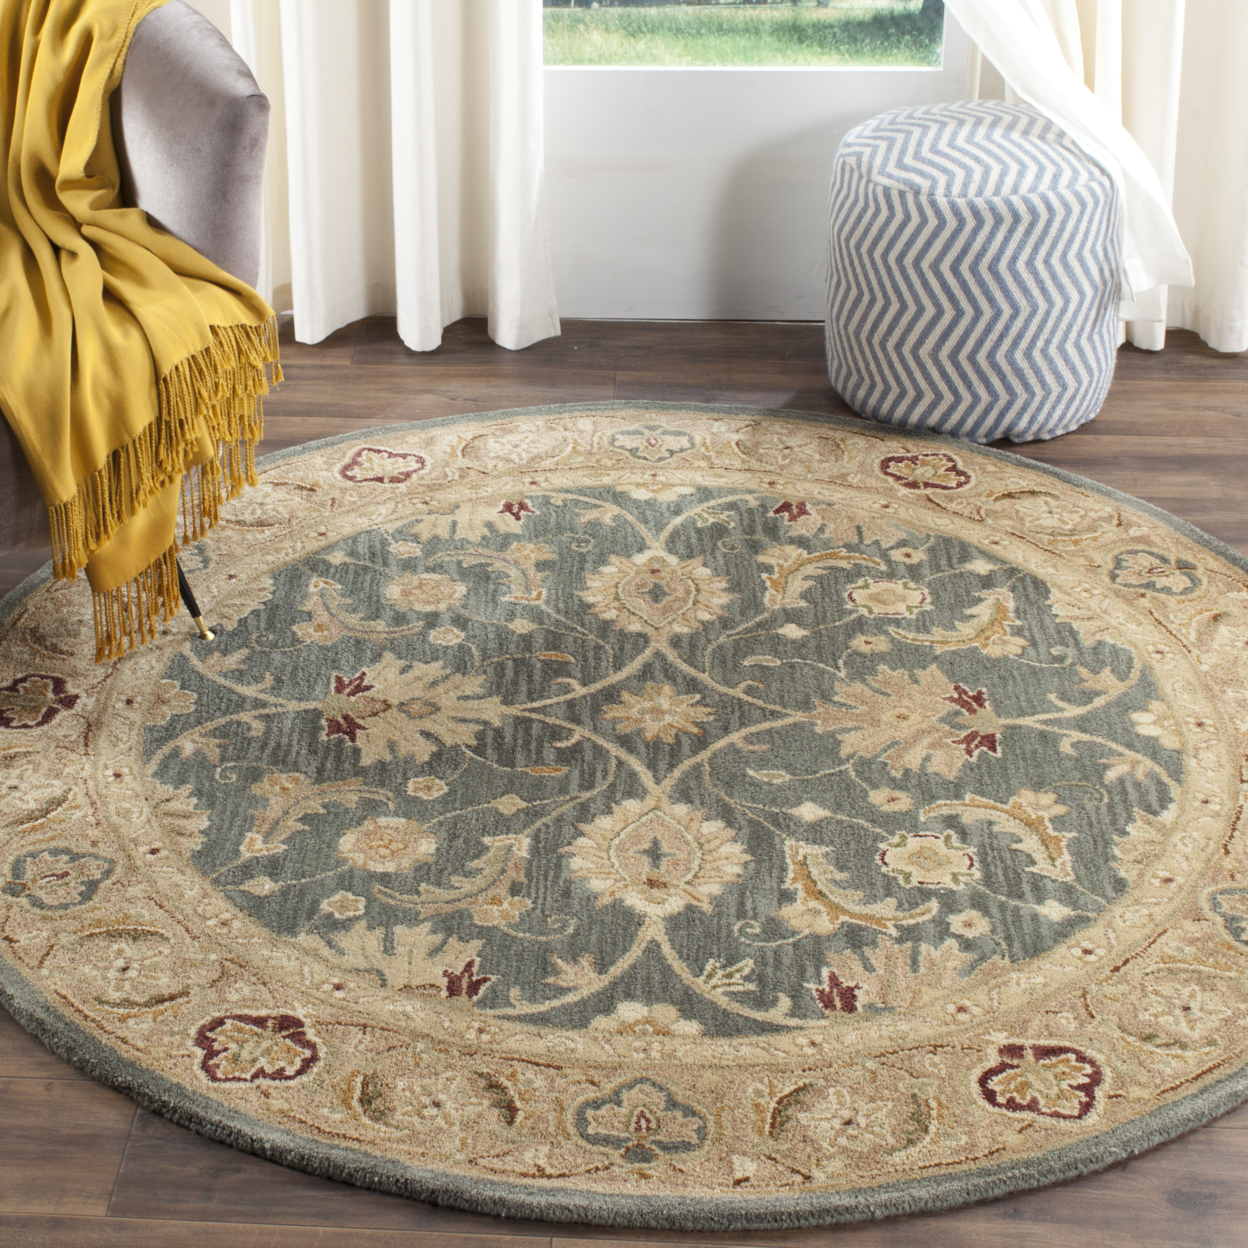 SAFAVIEH Antiquity AT849B Handmade Teal Blue / Taupe Rug - 6' Square